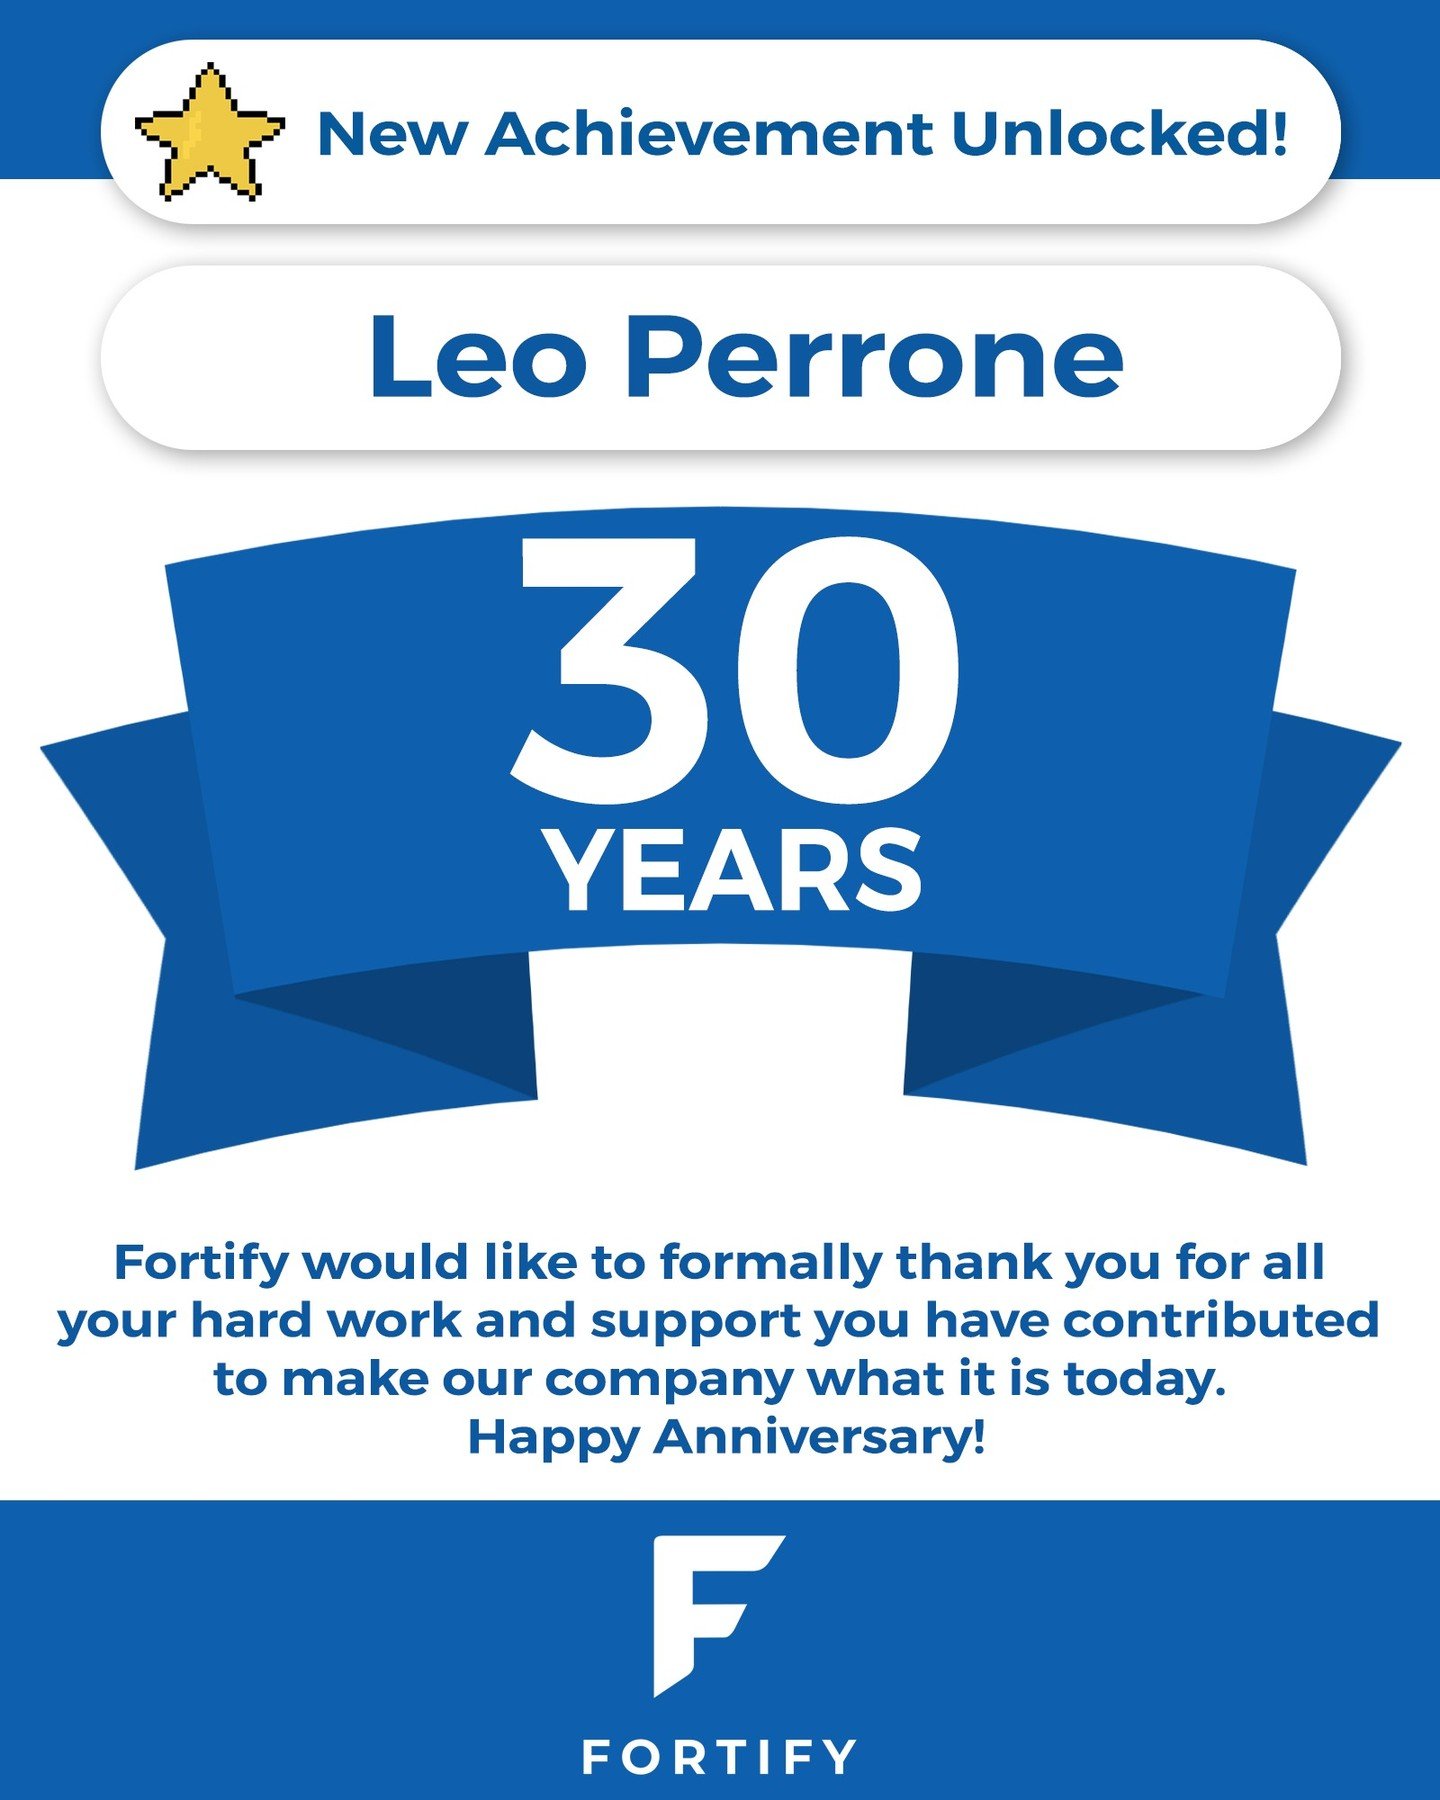 This month, Leo Perrone, one of our Network Professionals, celebrated 30 years with Fortify! We're so grateful to have loyal employees like Leo, who has been with us through it all. Our favourite quality about Leo (aside from being a Helpdesk rocksta